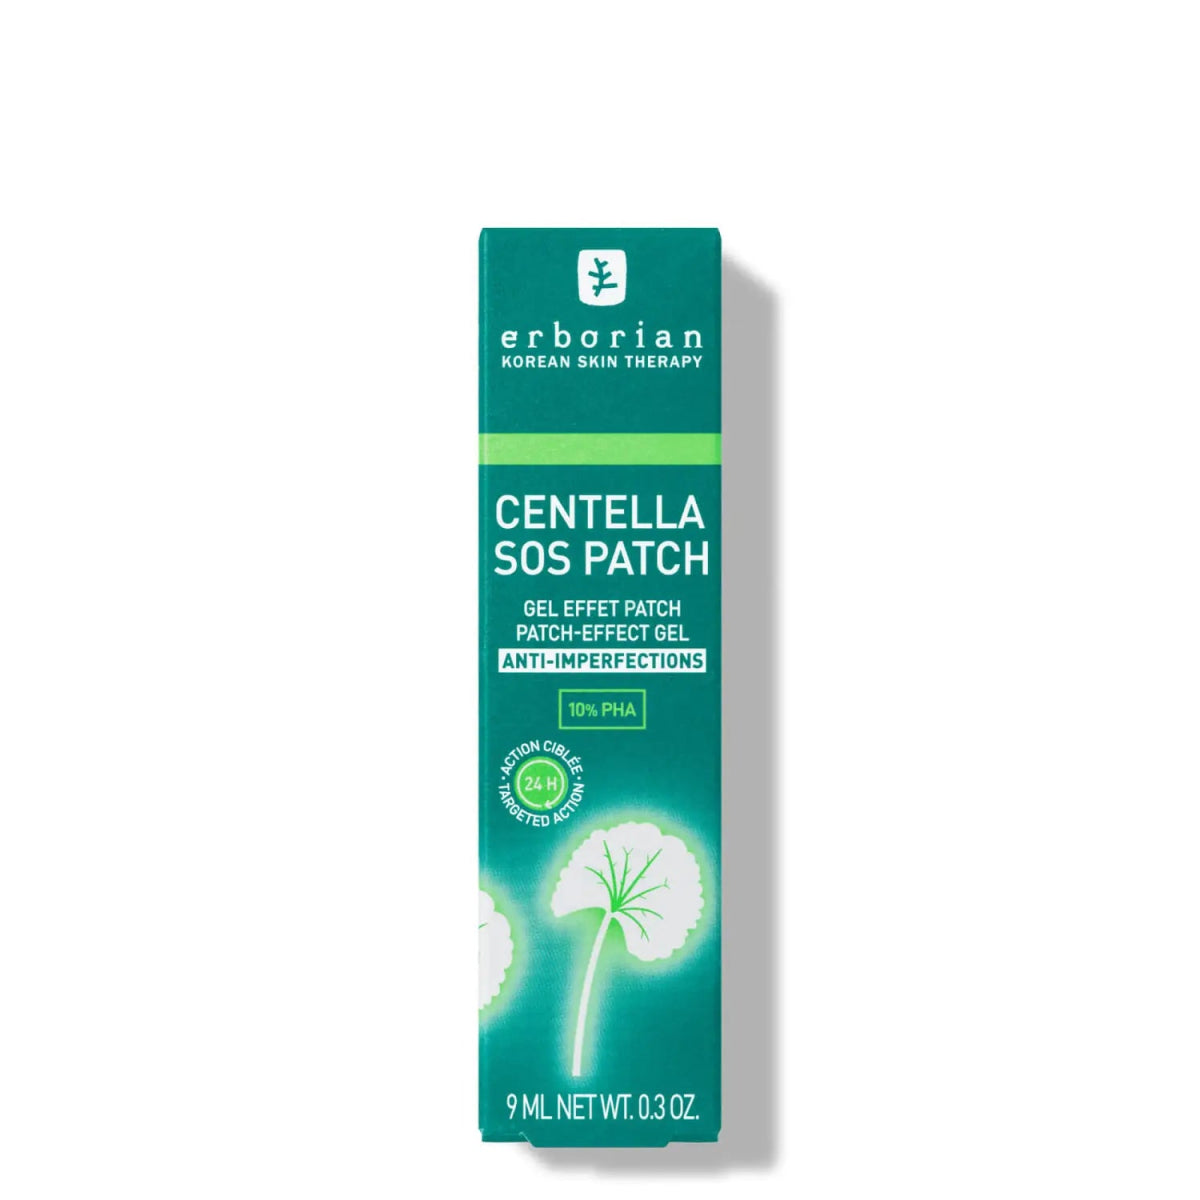 Centella SOS Patch - Infinity Concept Store